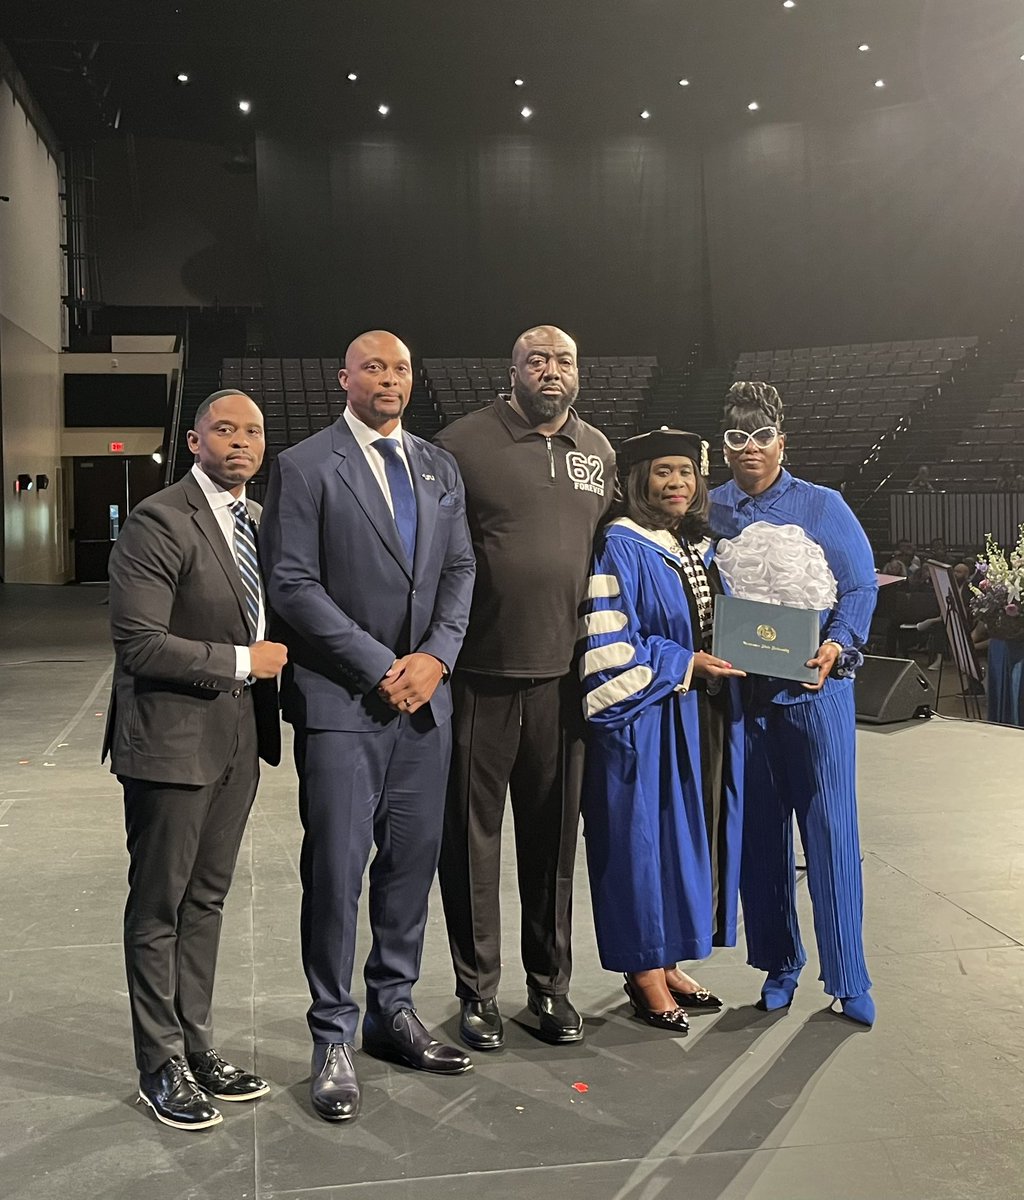 TSU President @gloverpres presented the parents of Chazan Page his undergrad degree and proclamation during a memorial service celebrating his life. Parents Rico and Lawanda Page were joined by Head Football Coach @EddieGeorge2727 & AD @mikkiallen for the presentation. #Tiger